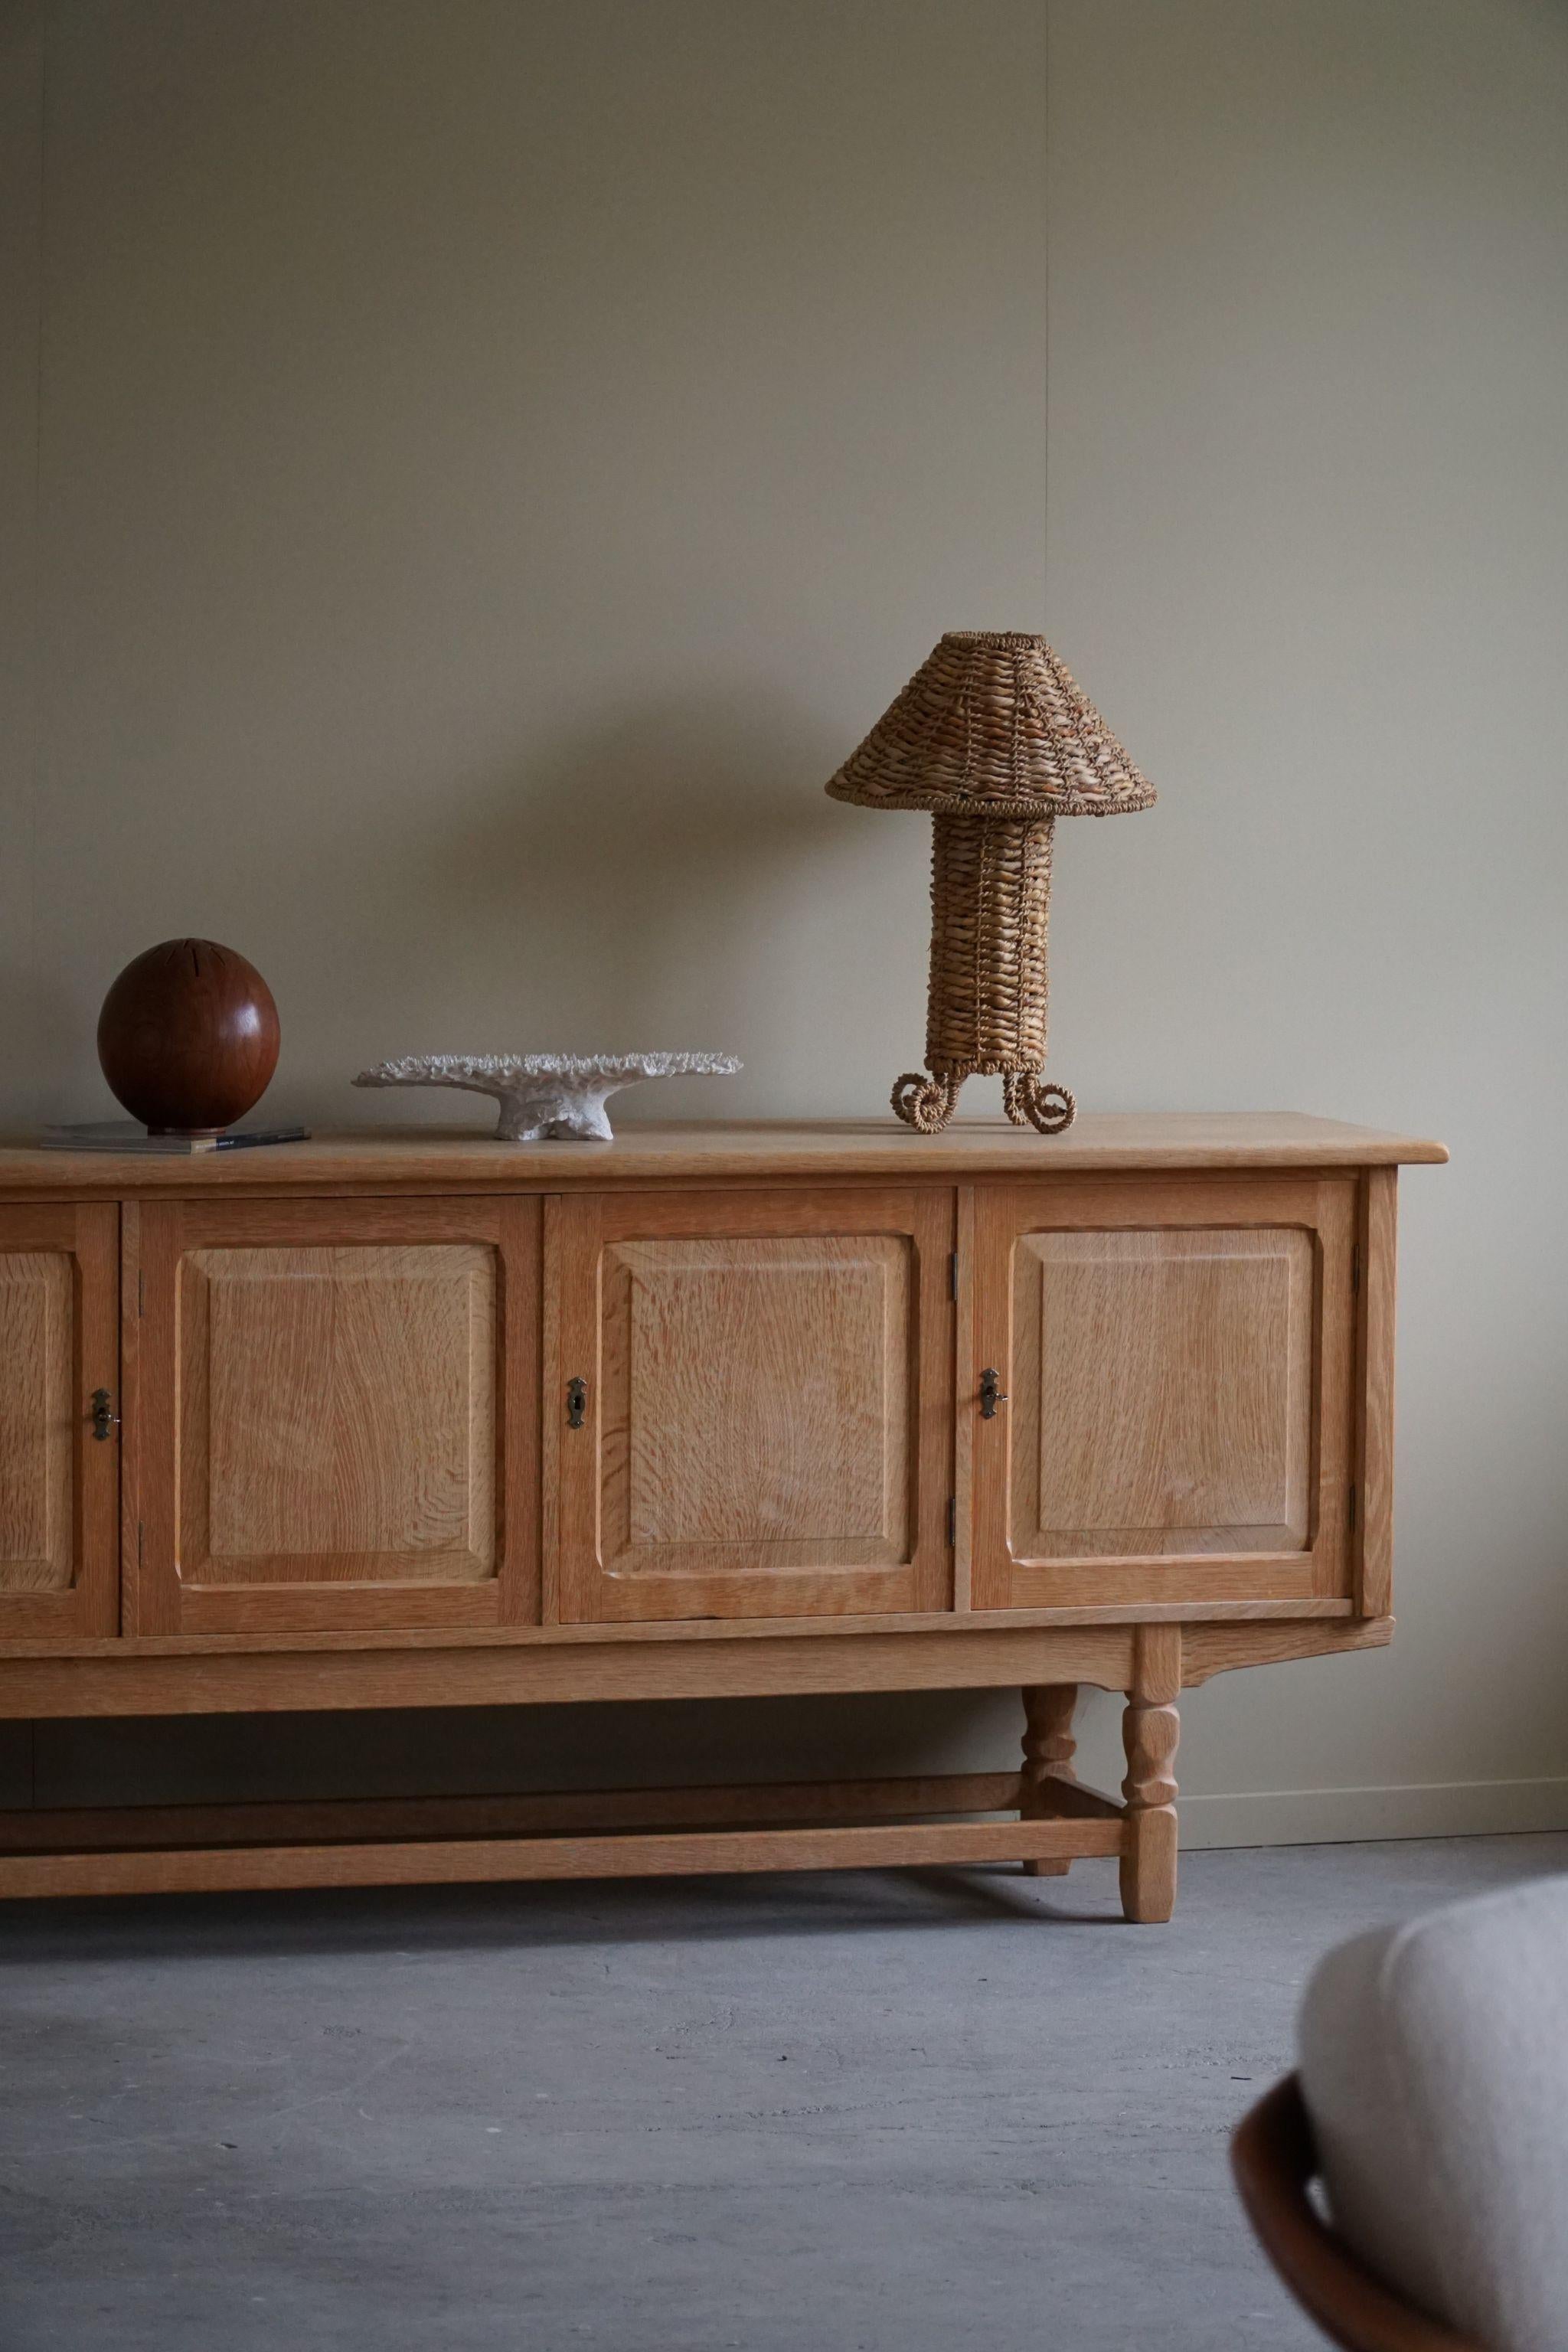 Beautiful low Classic sideboard in oak. Made by a Danish cabinetmaker in 1960s. This piece is in a great vintage condition, with few signs of wear.

This brutalist object will fit into many interior styles. A modern, Scandinavian, Classic or an Art